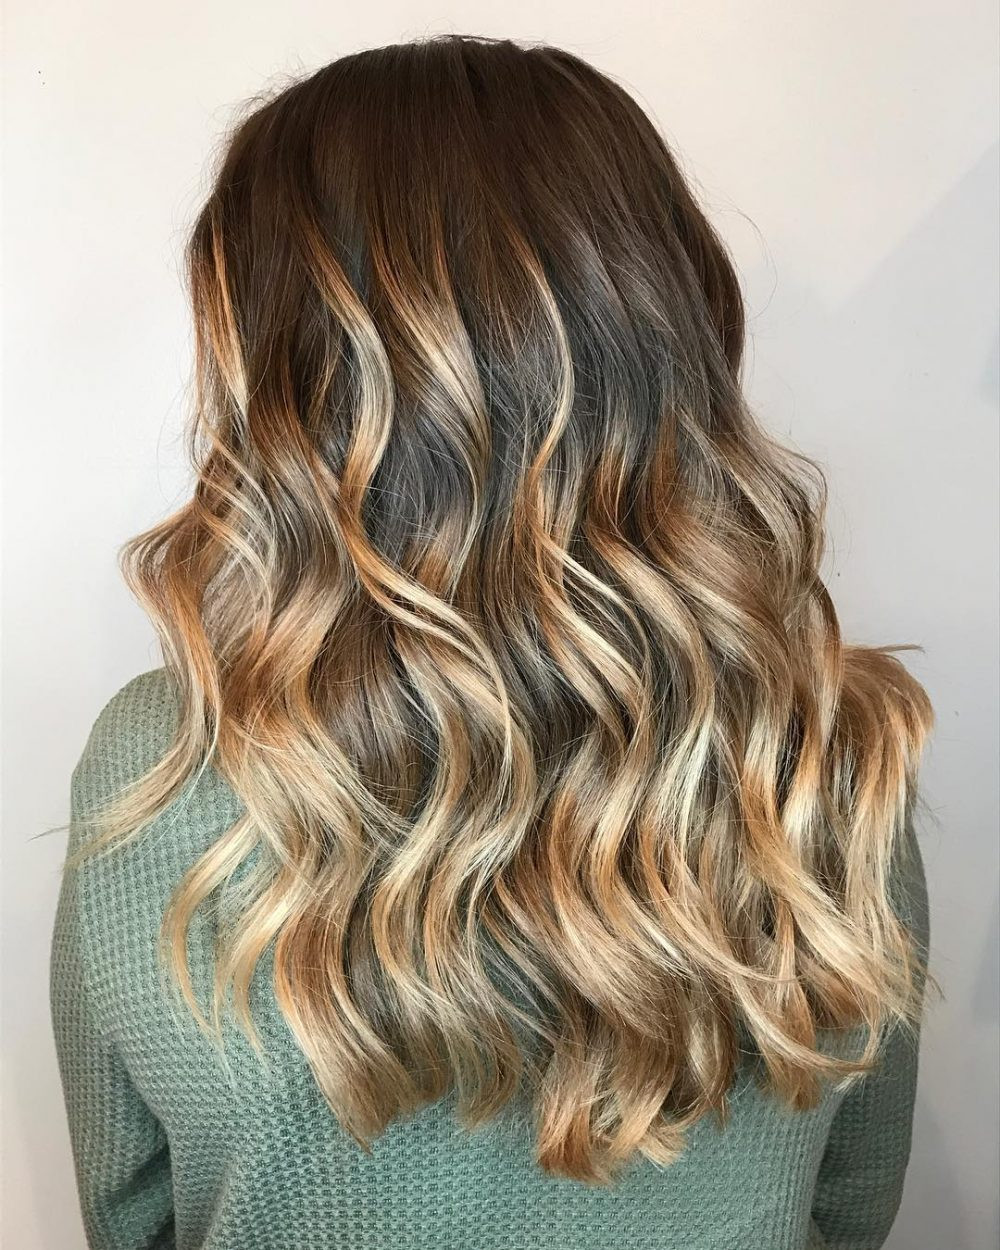 Long Ombre Hairstyles
 23 Long Ombre Hair Ideas Blowing Up in 2018